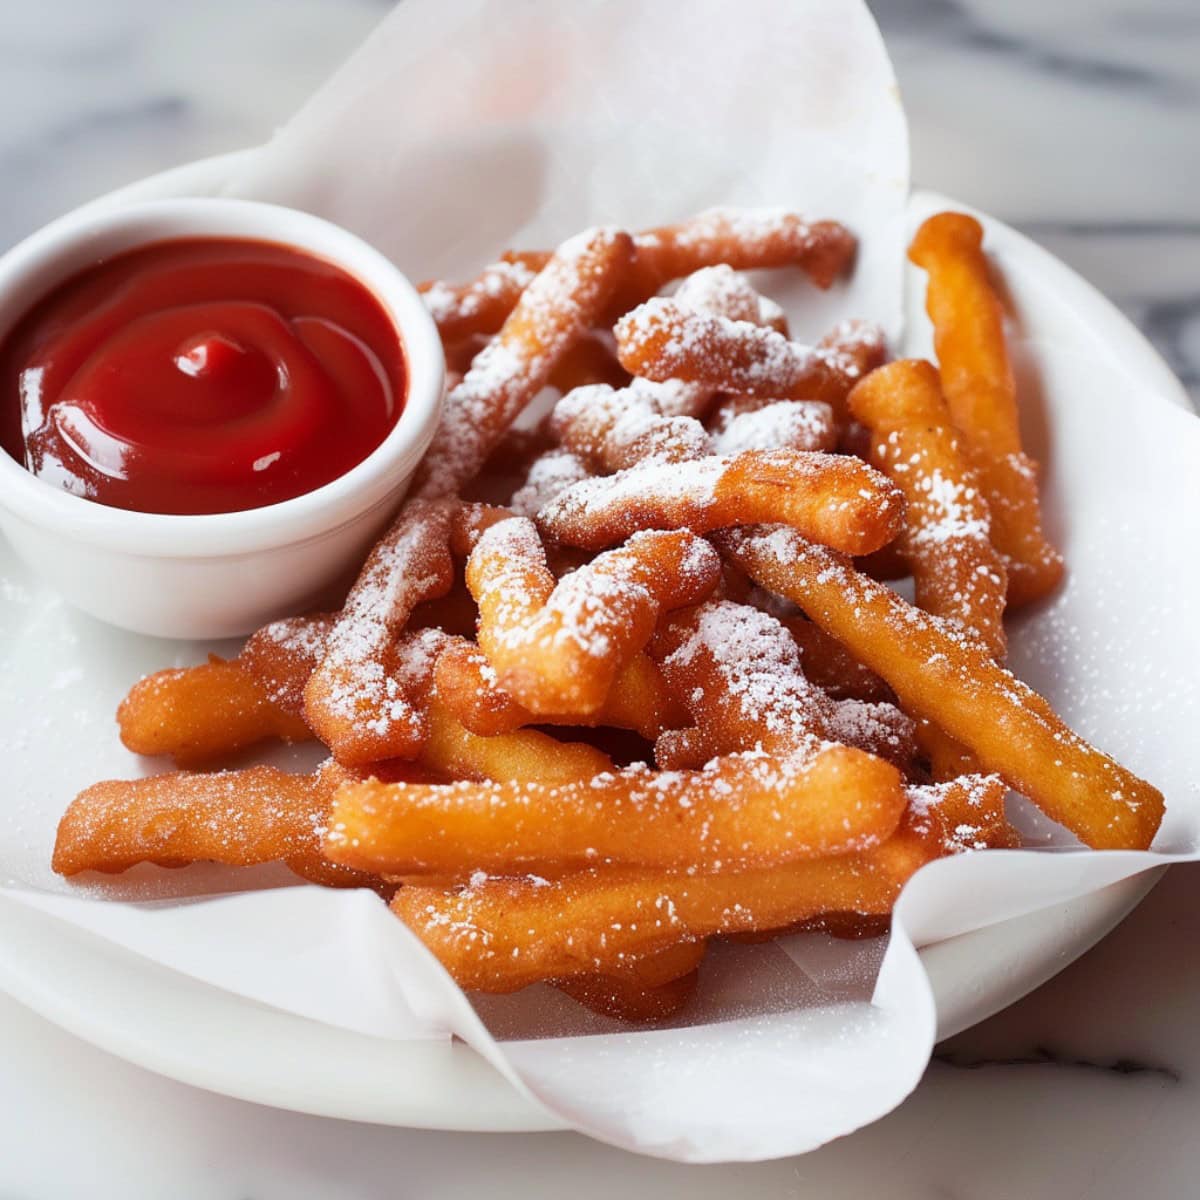 Crispy funnel cake fries, golden-brown and dusted with powdered sugar for a sweet treat